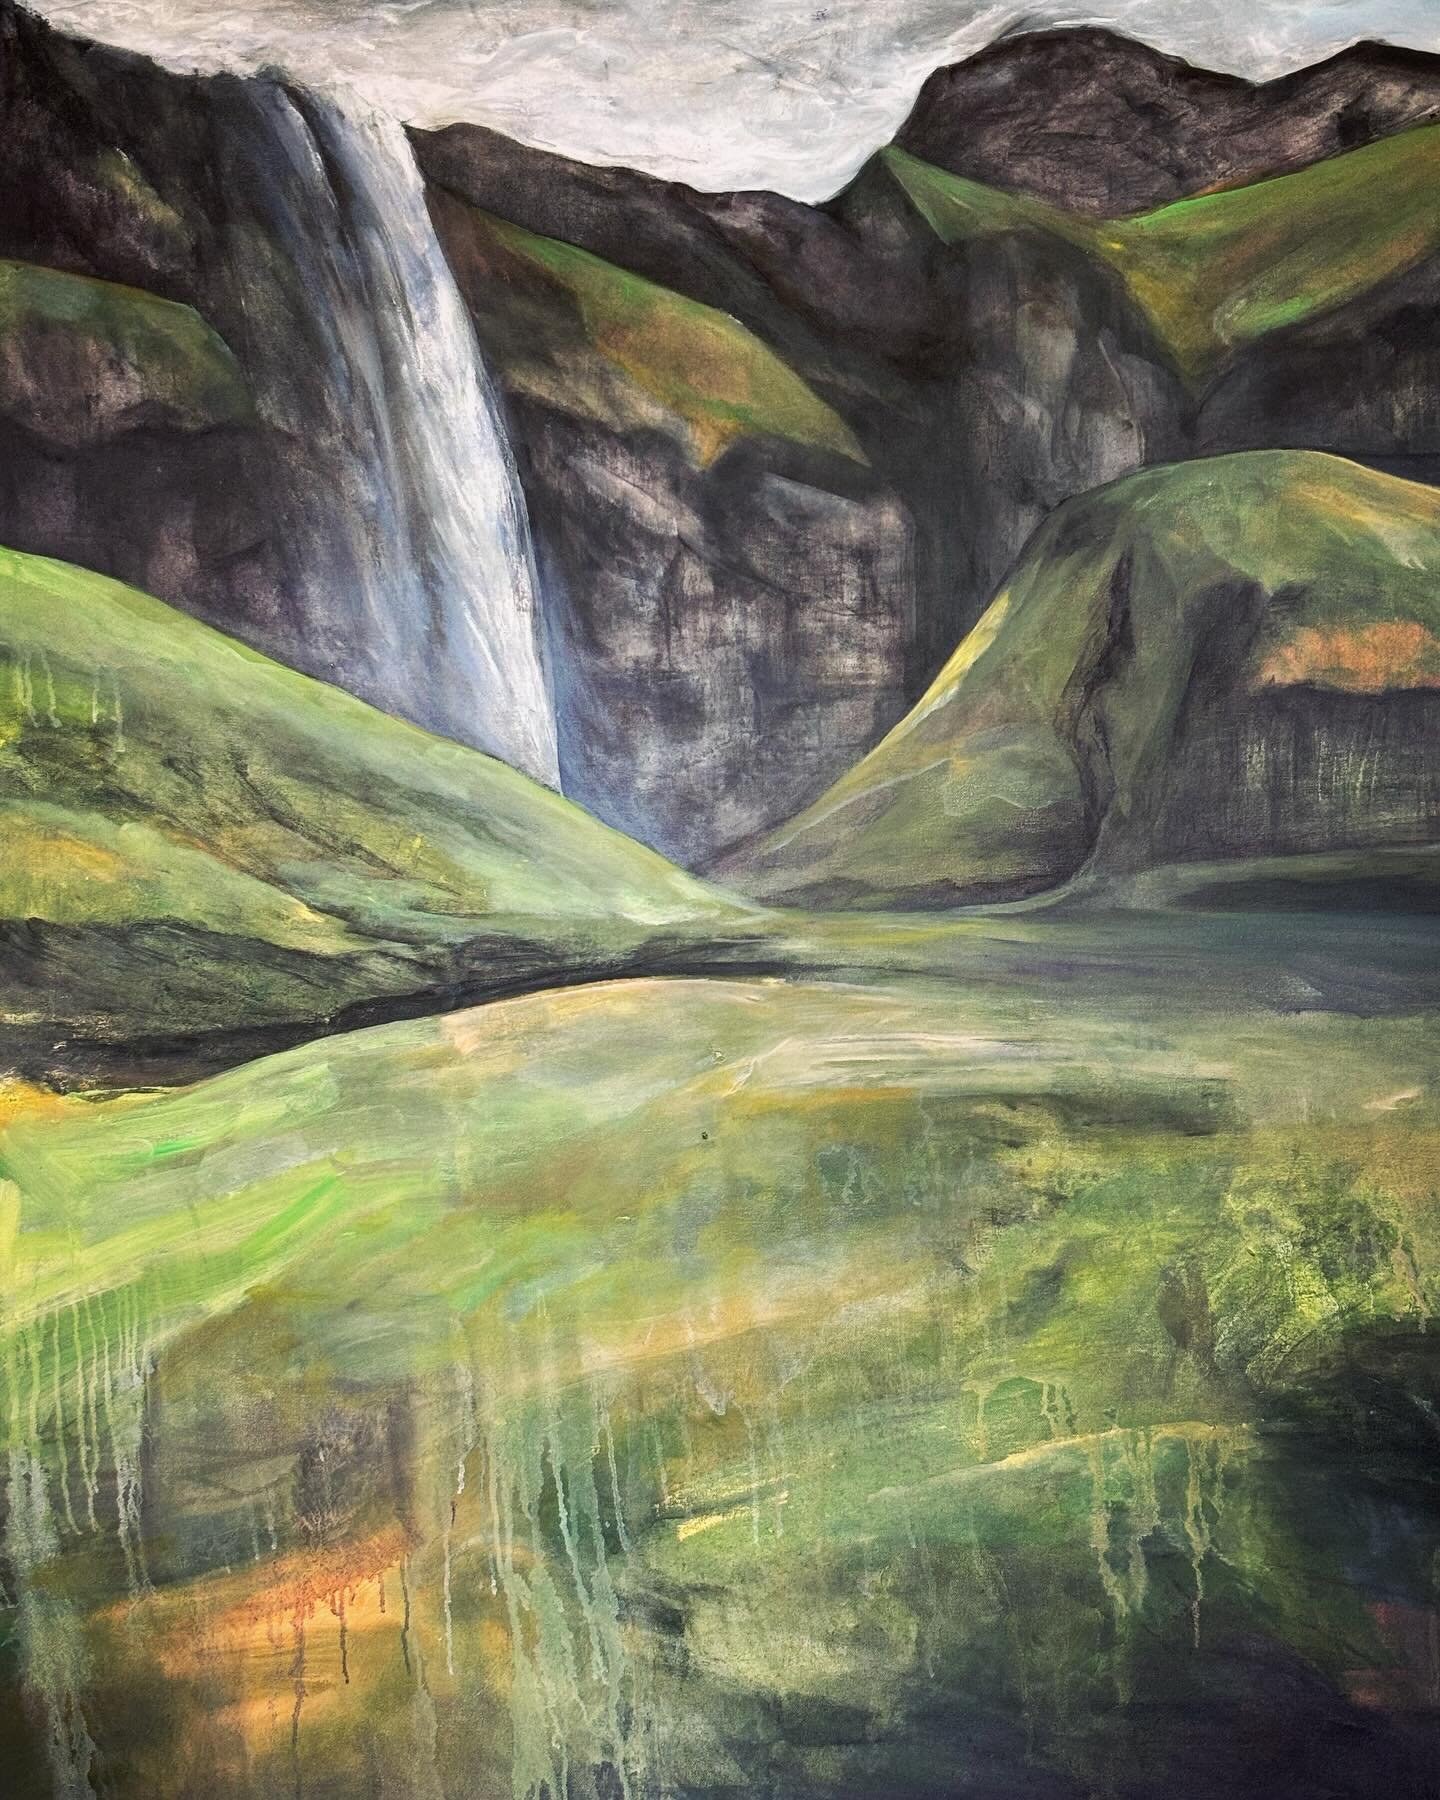 I first started this painting in 2015 after @tessajagger explored around Iceland together. It&rsquo;s been through about a dozen changes but I think we&rsquo;ve finally found our landing spot. #seljalandsfoss #studiotoday #workharder #grateful #inspi